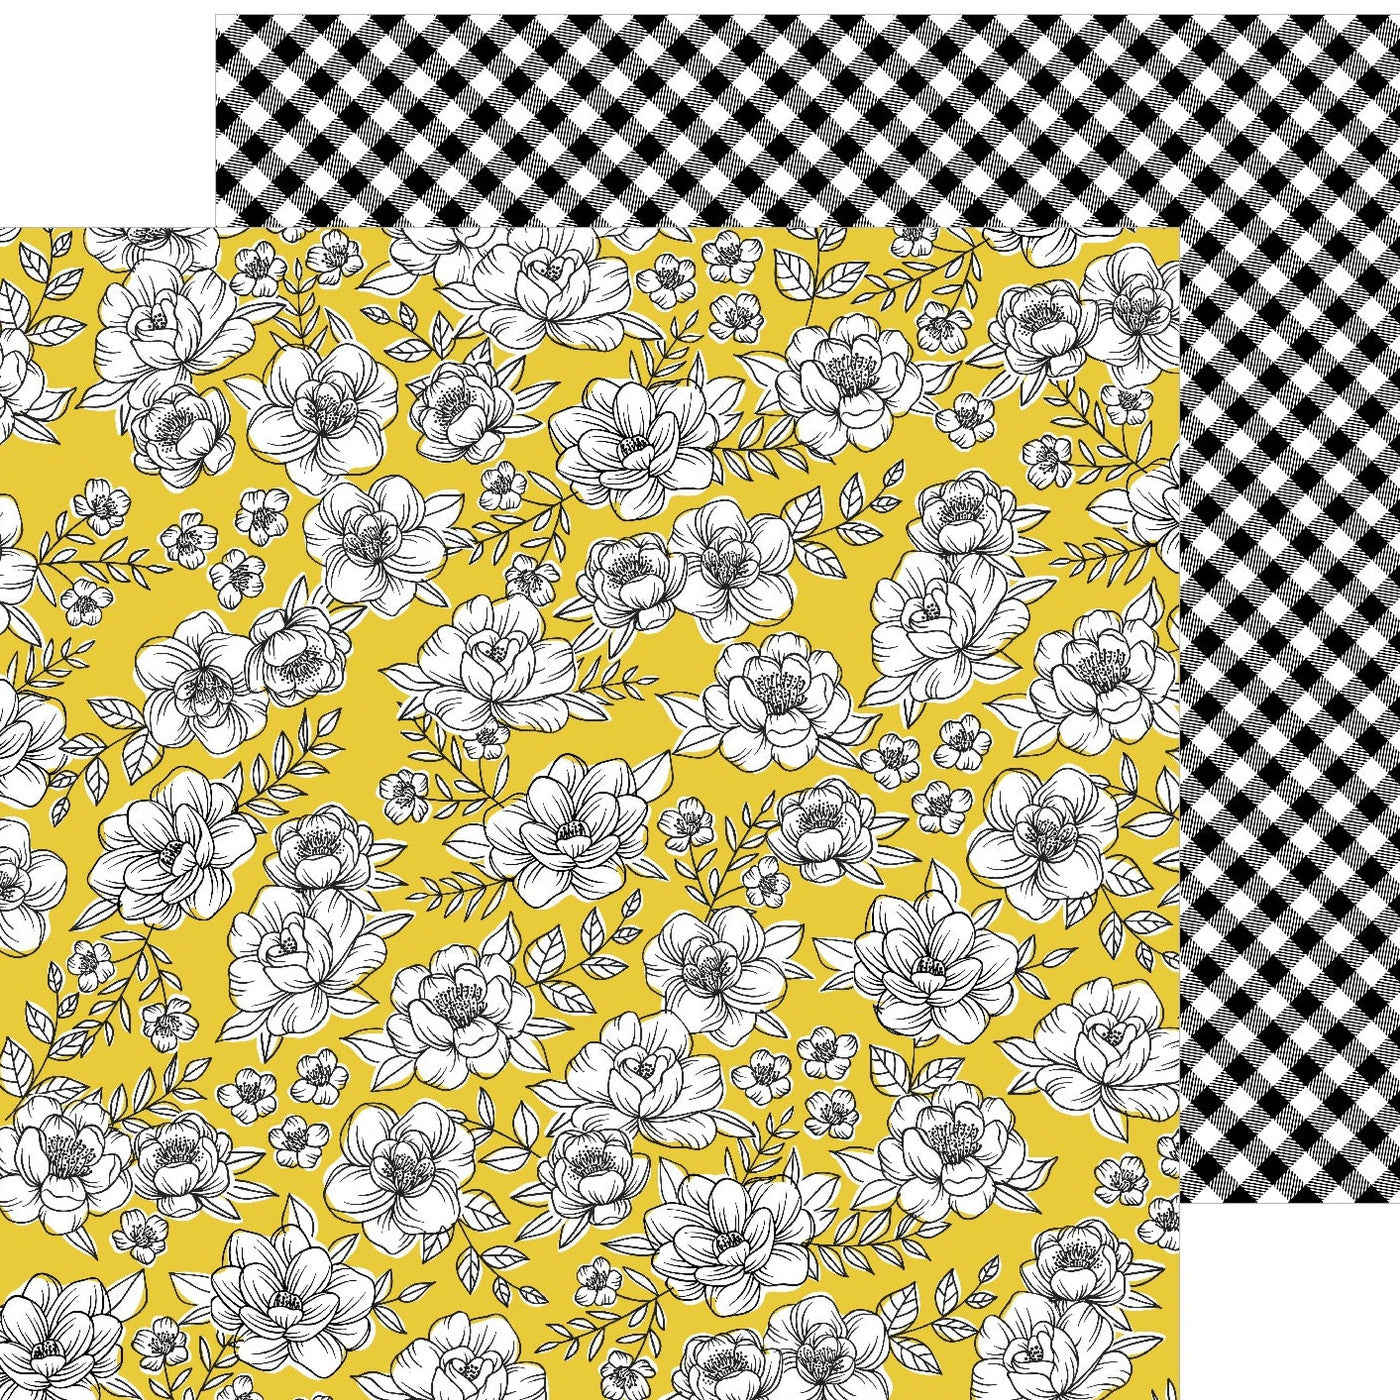 Multi-Colored (Side A - beautiful white rose floral on a yellow background, Side B - black and white plaid)